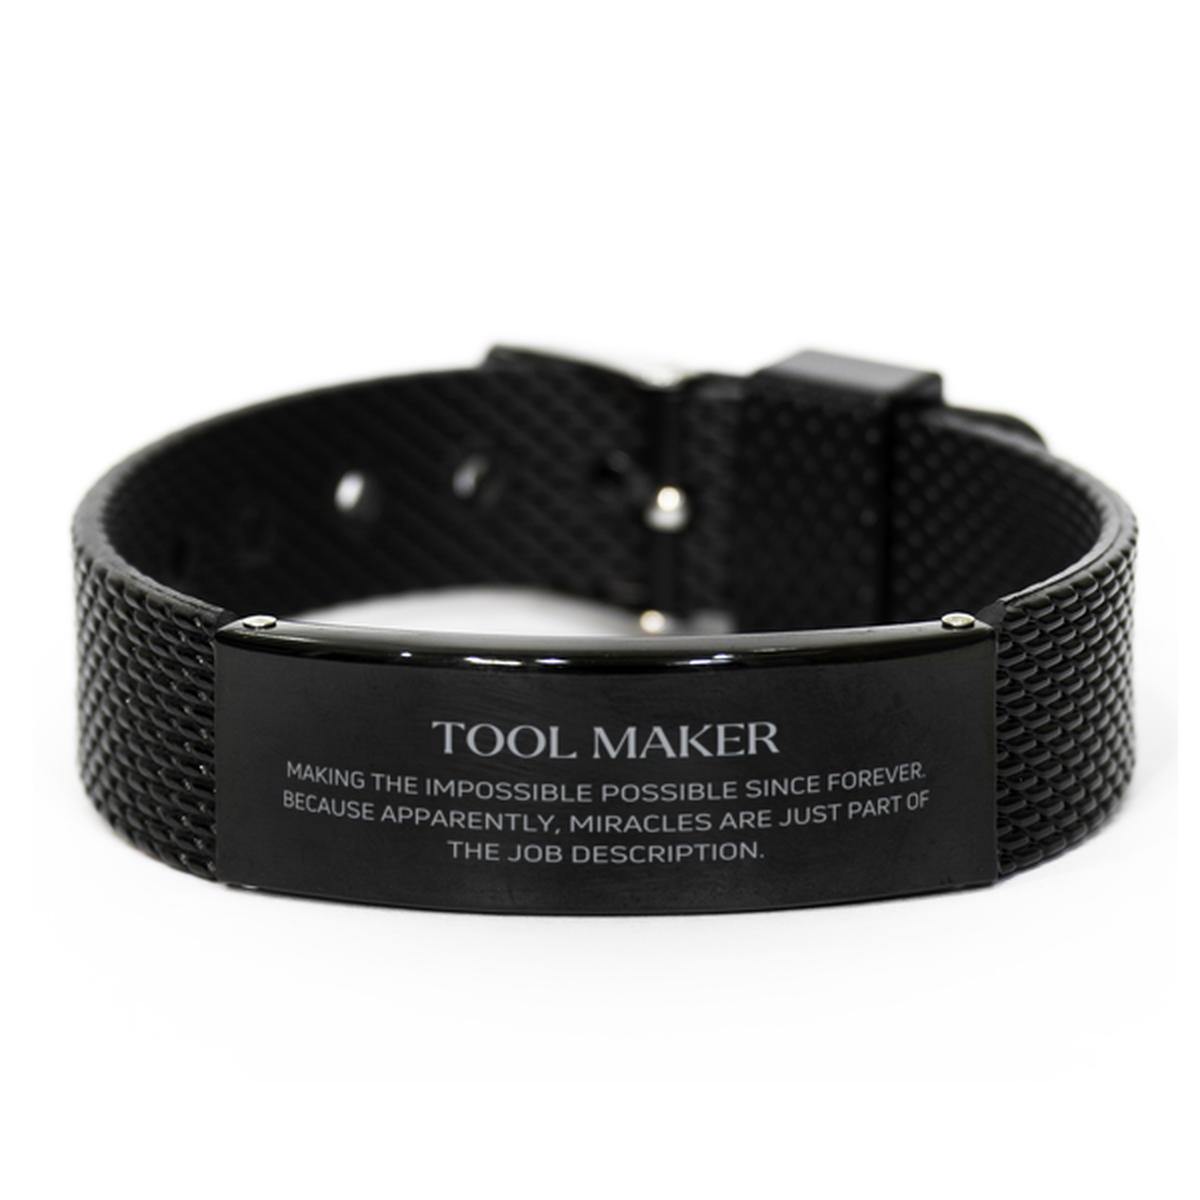 Funny Tool Maker Gifts, Miracles are just part of the job description, Inspirational Birthday Black Shark Mesh Bracelet For Tool Maker, Men, Women, Coworkers, Friends, Boss